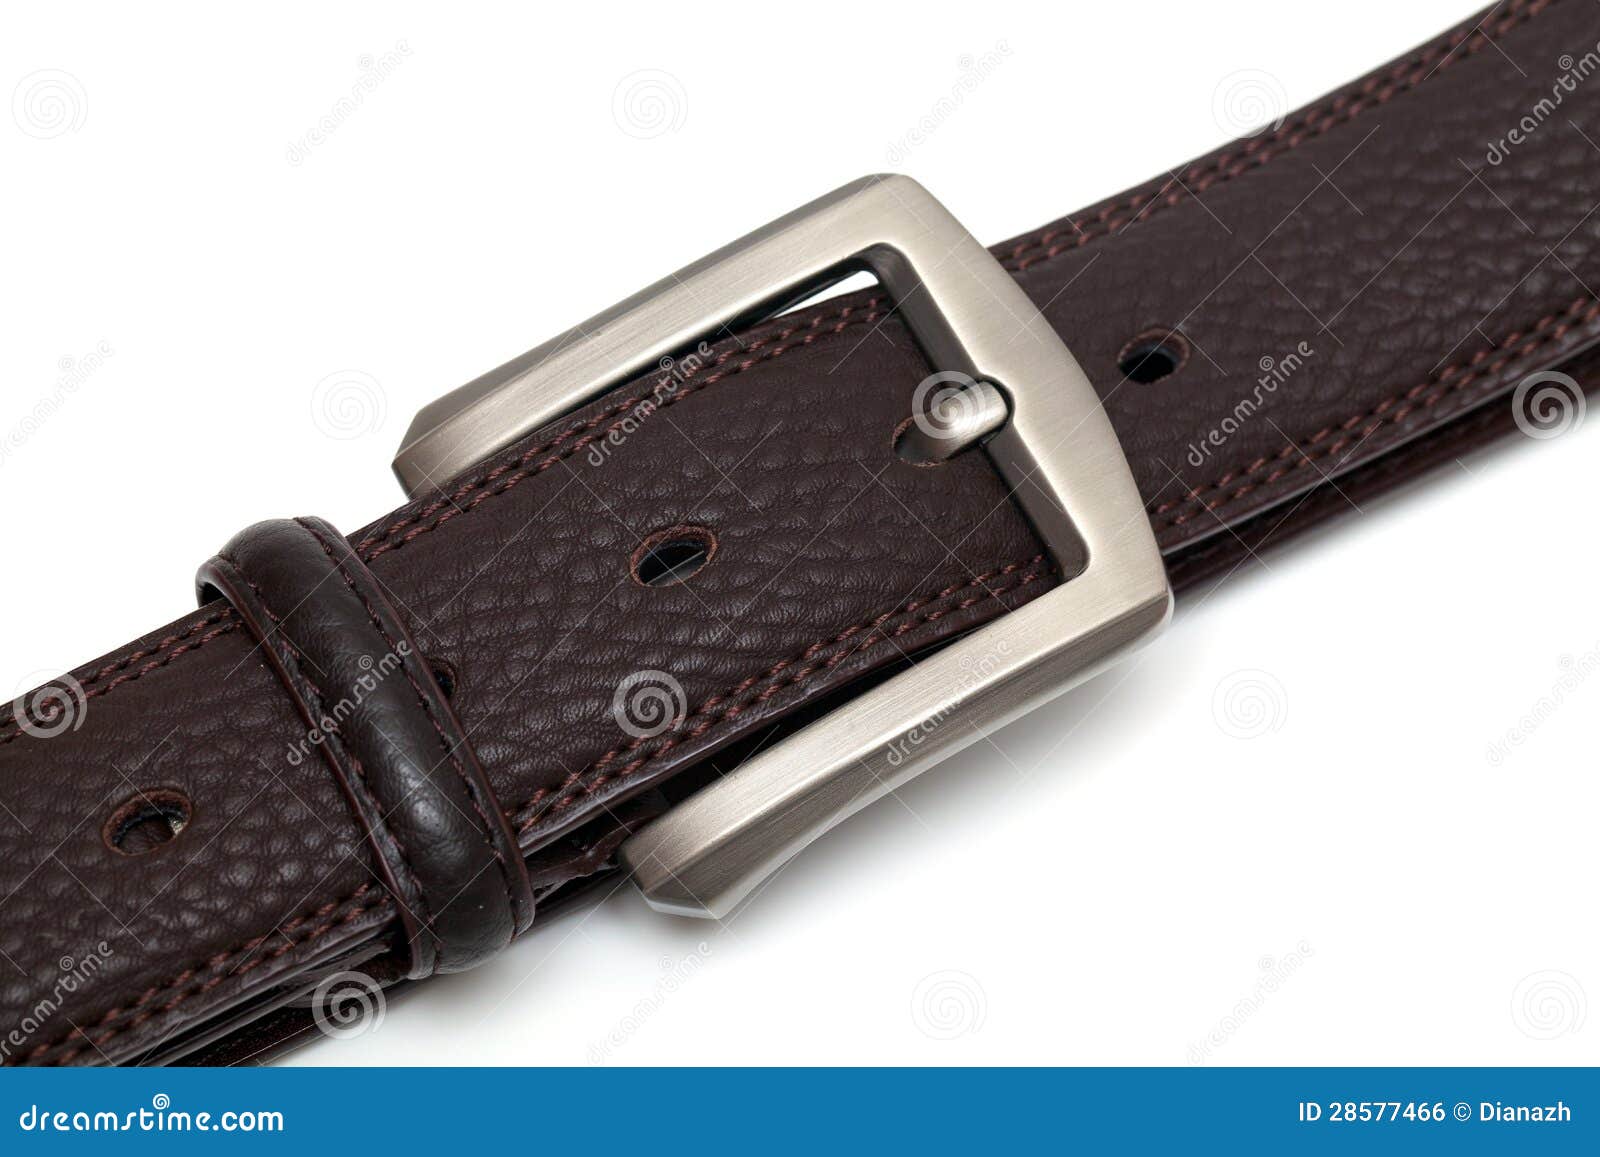 New leather belt stock photo. Image of loop, hold, buckle - 28577466